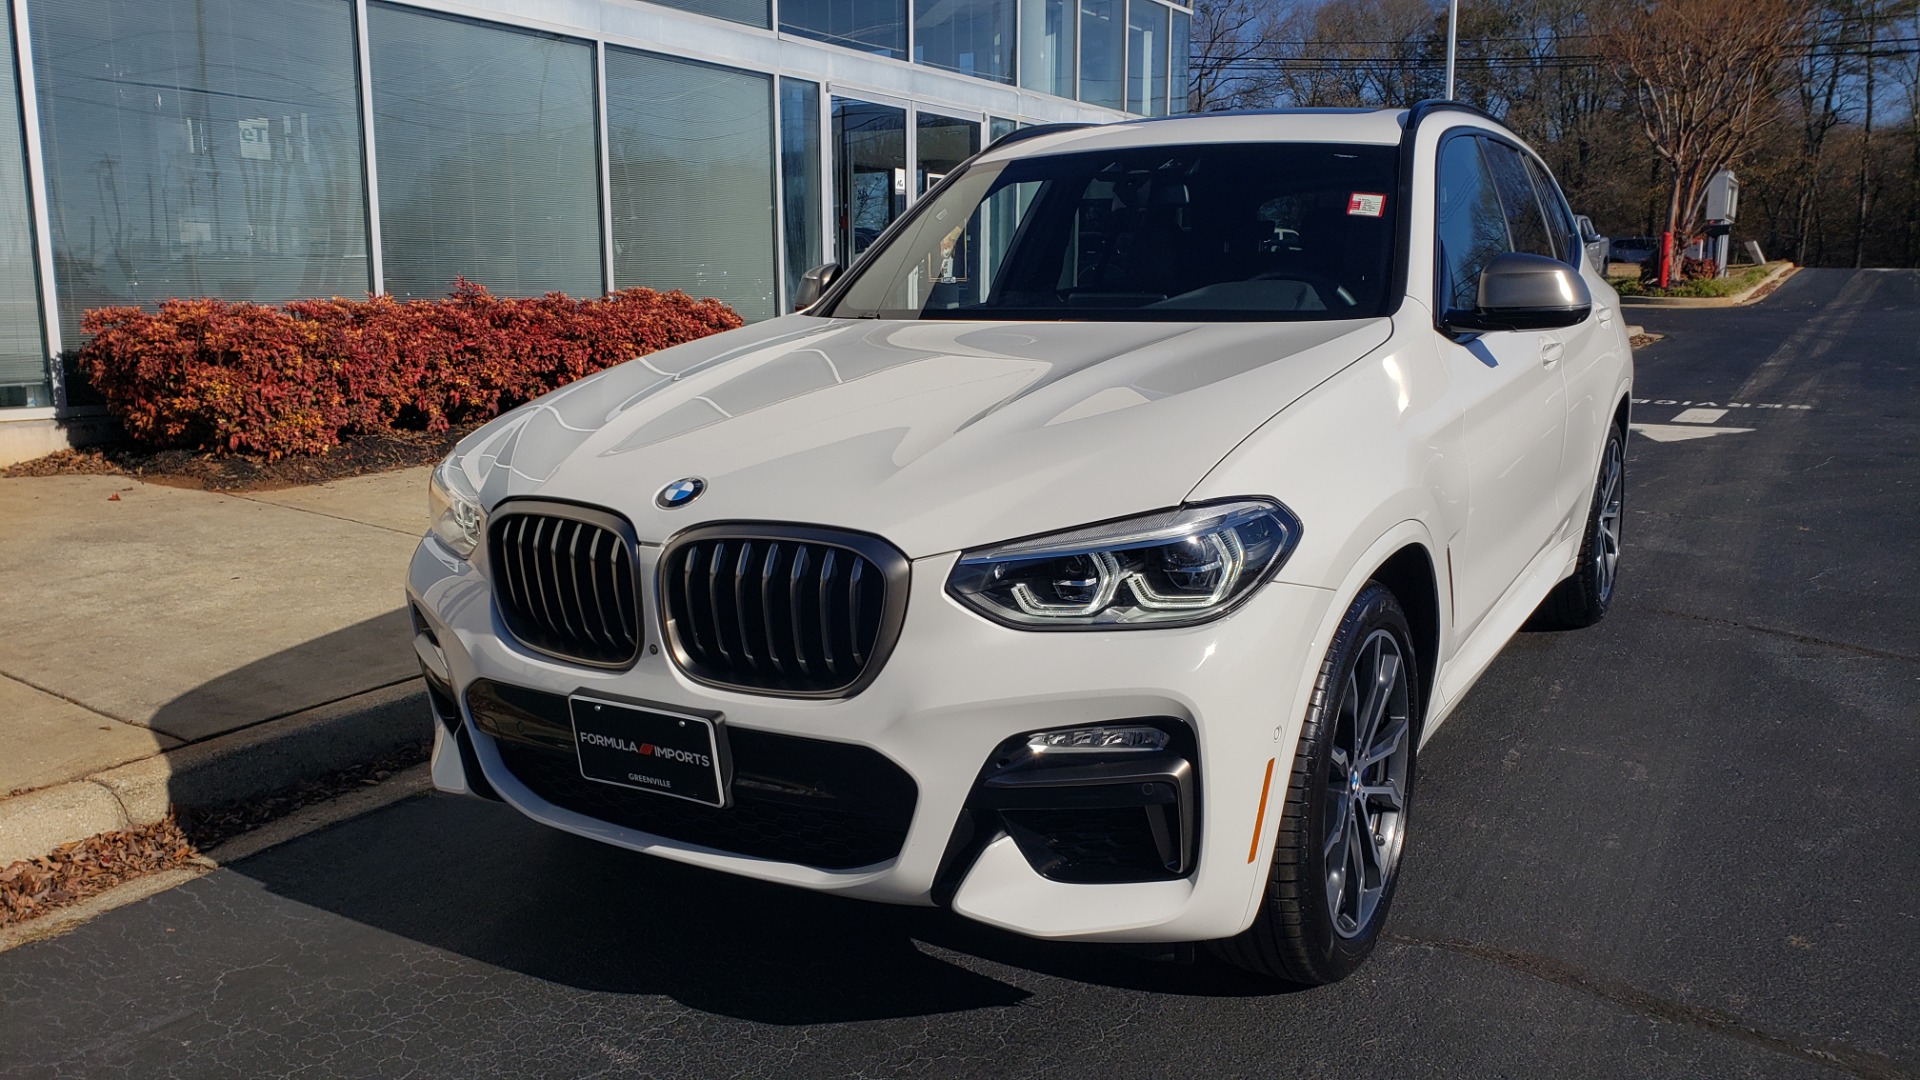 Used 2019 BMW X3 M40I SPORT / NAV / SUNROOF / DRVR ASST / PARK ASST / HTD STS / REARVIEW for sale $53,495 at Formula Imports in Charlotte NC 28227 1